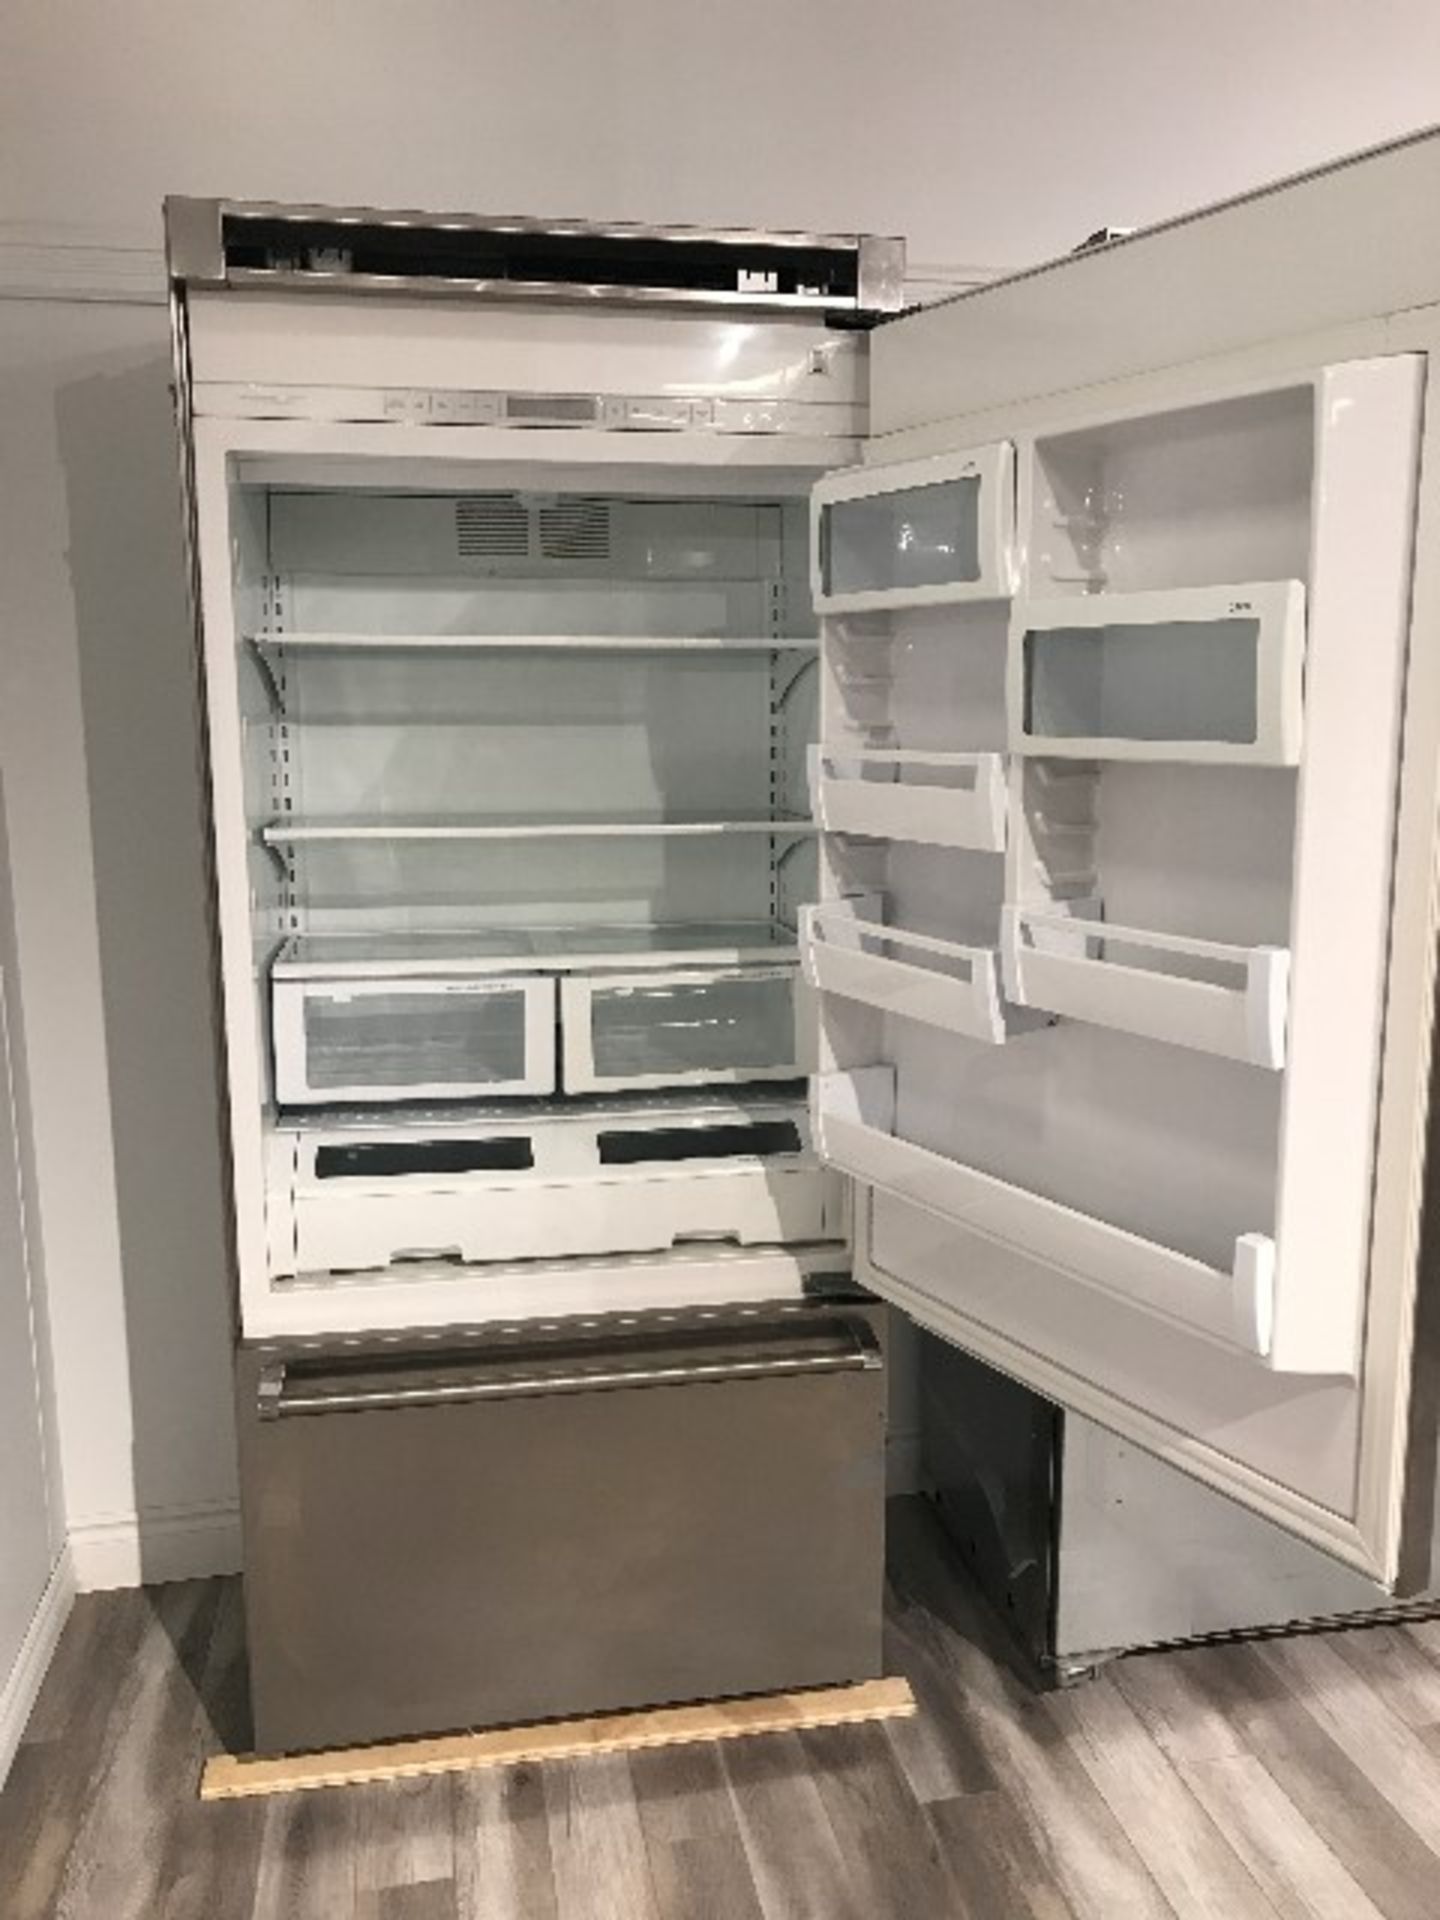 Brigate Professional S/S refrigerator TEL QUEL,AS IS,MAY REQUIRE SERVICE & PARTS - Image 2 of 2